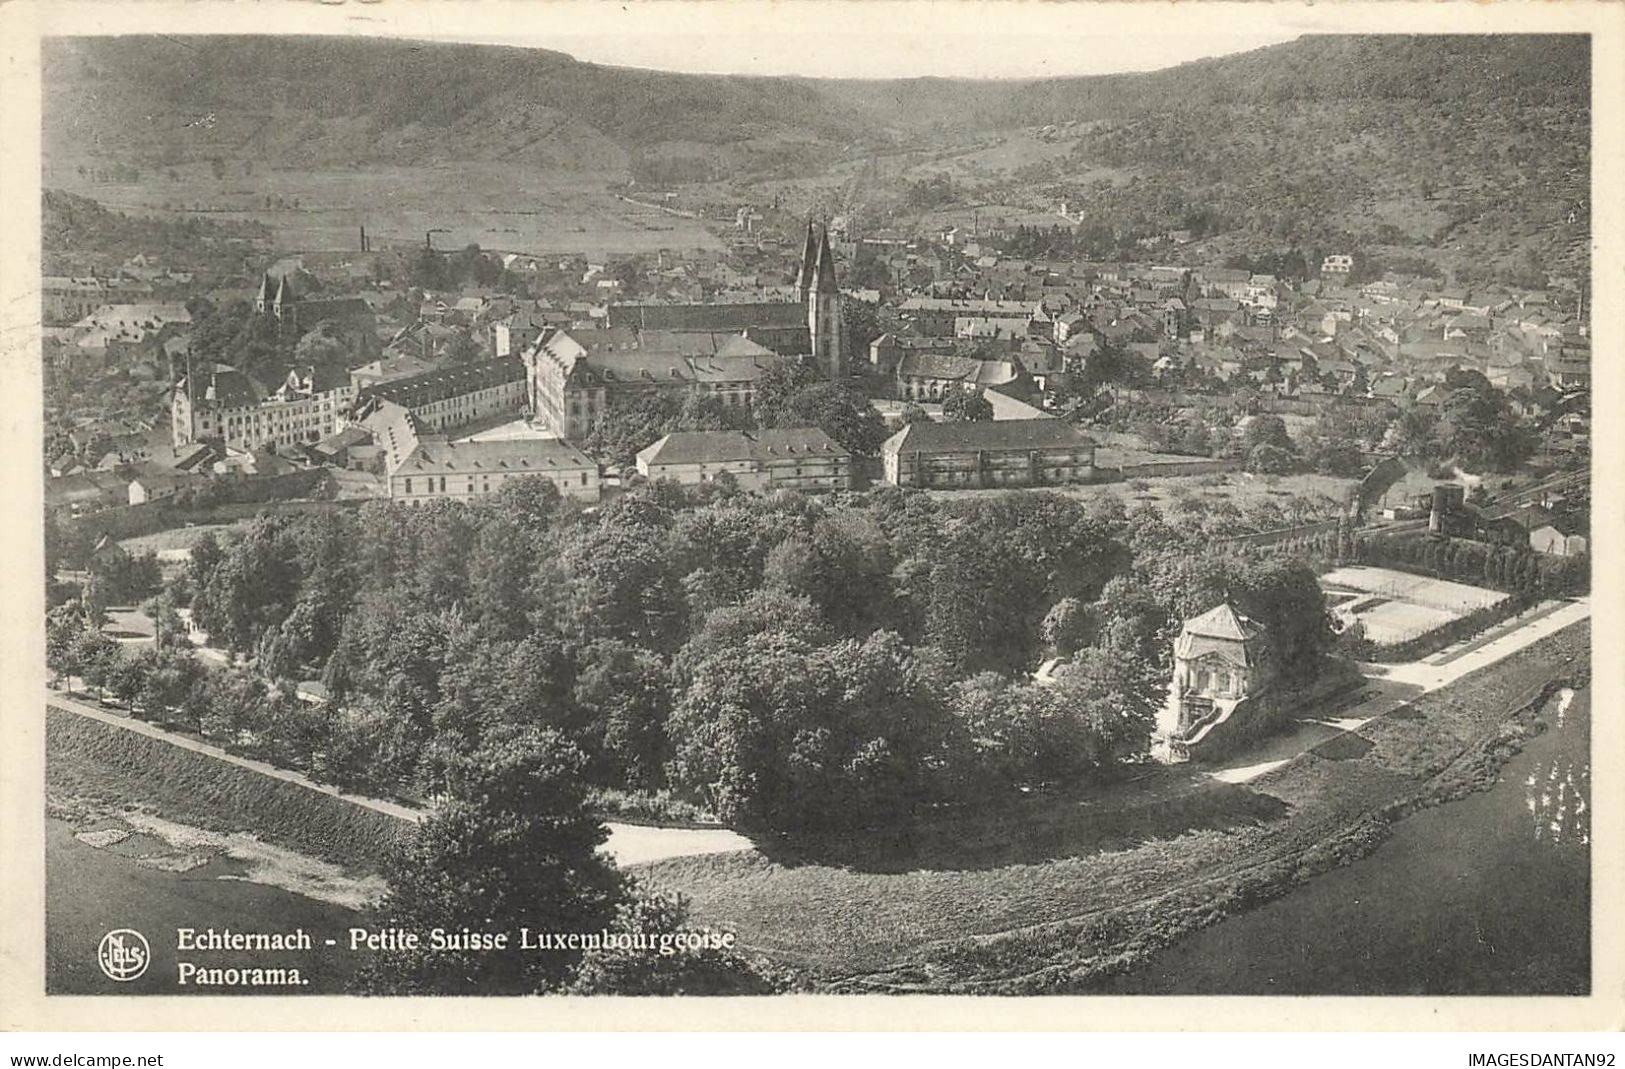 LUXEMBOURG #AS31403 ECHTERNACH PETITE SUISSE LUXEMBOURGEOISE PANORAMA - Echternach